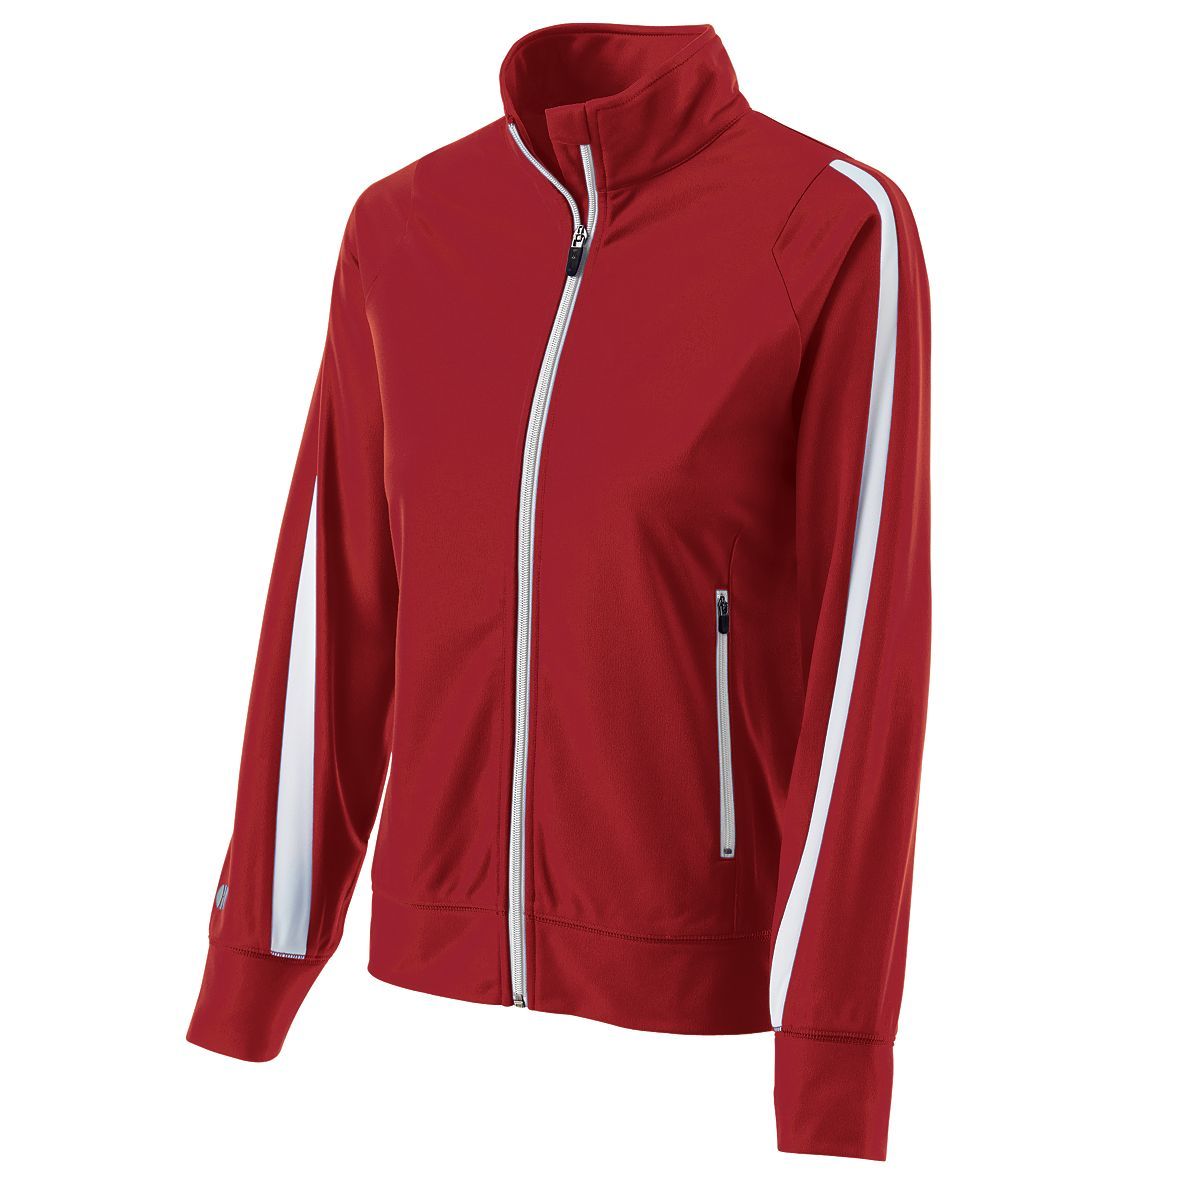 Holloway Ladies Determination Jacket in Scarlet/White  -Part of the Ladies, Ladies-Jacket, Holloway, Outerwear product lines at KanaleyCreations.com